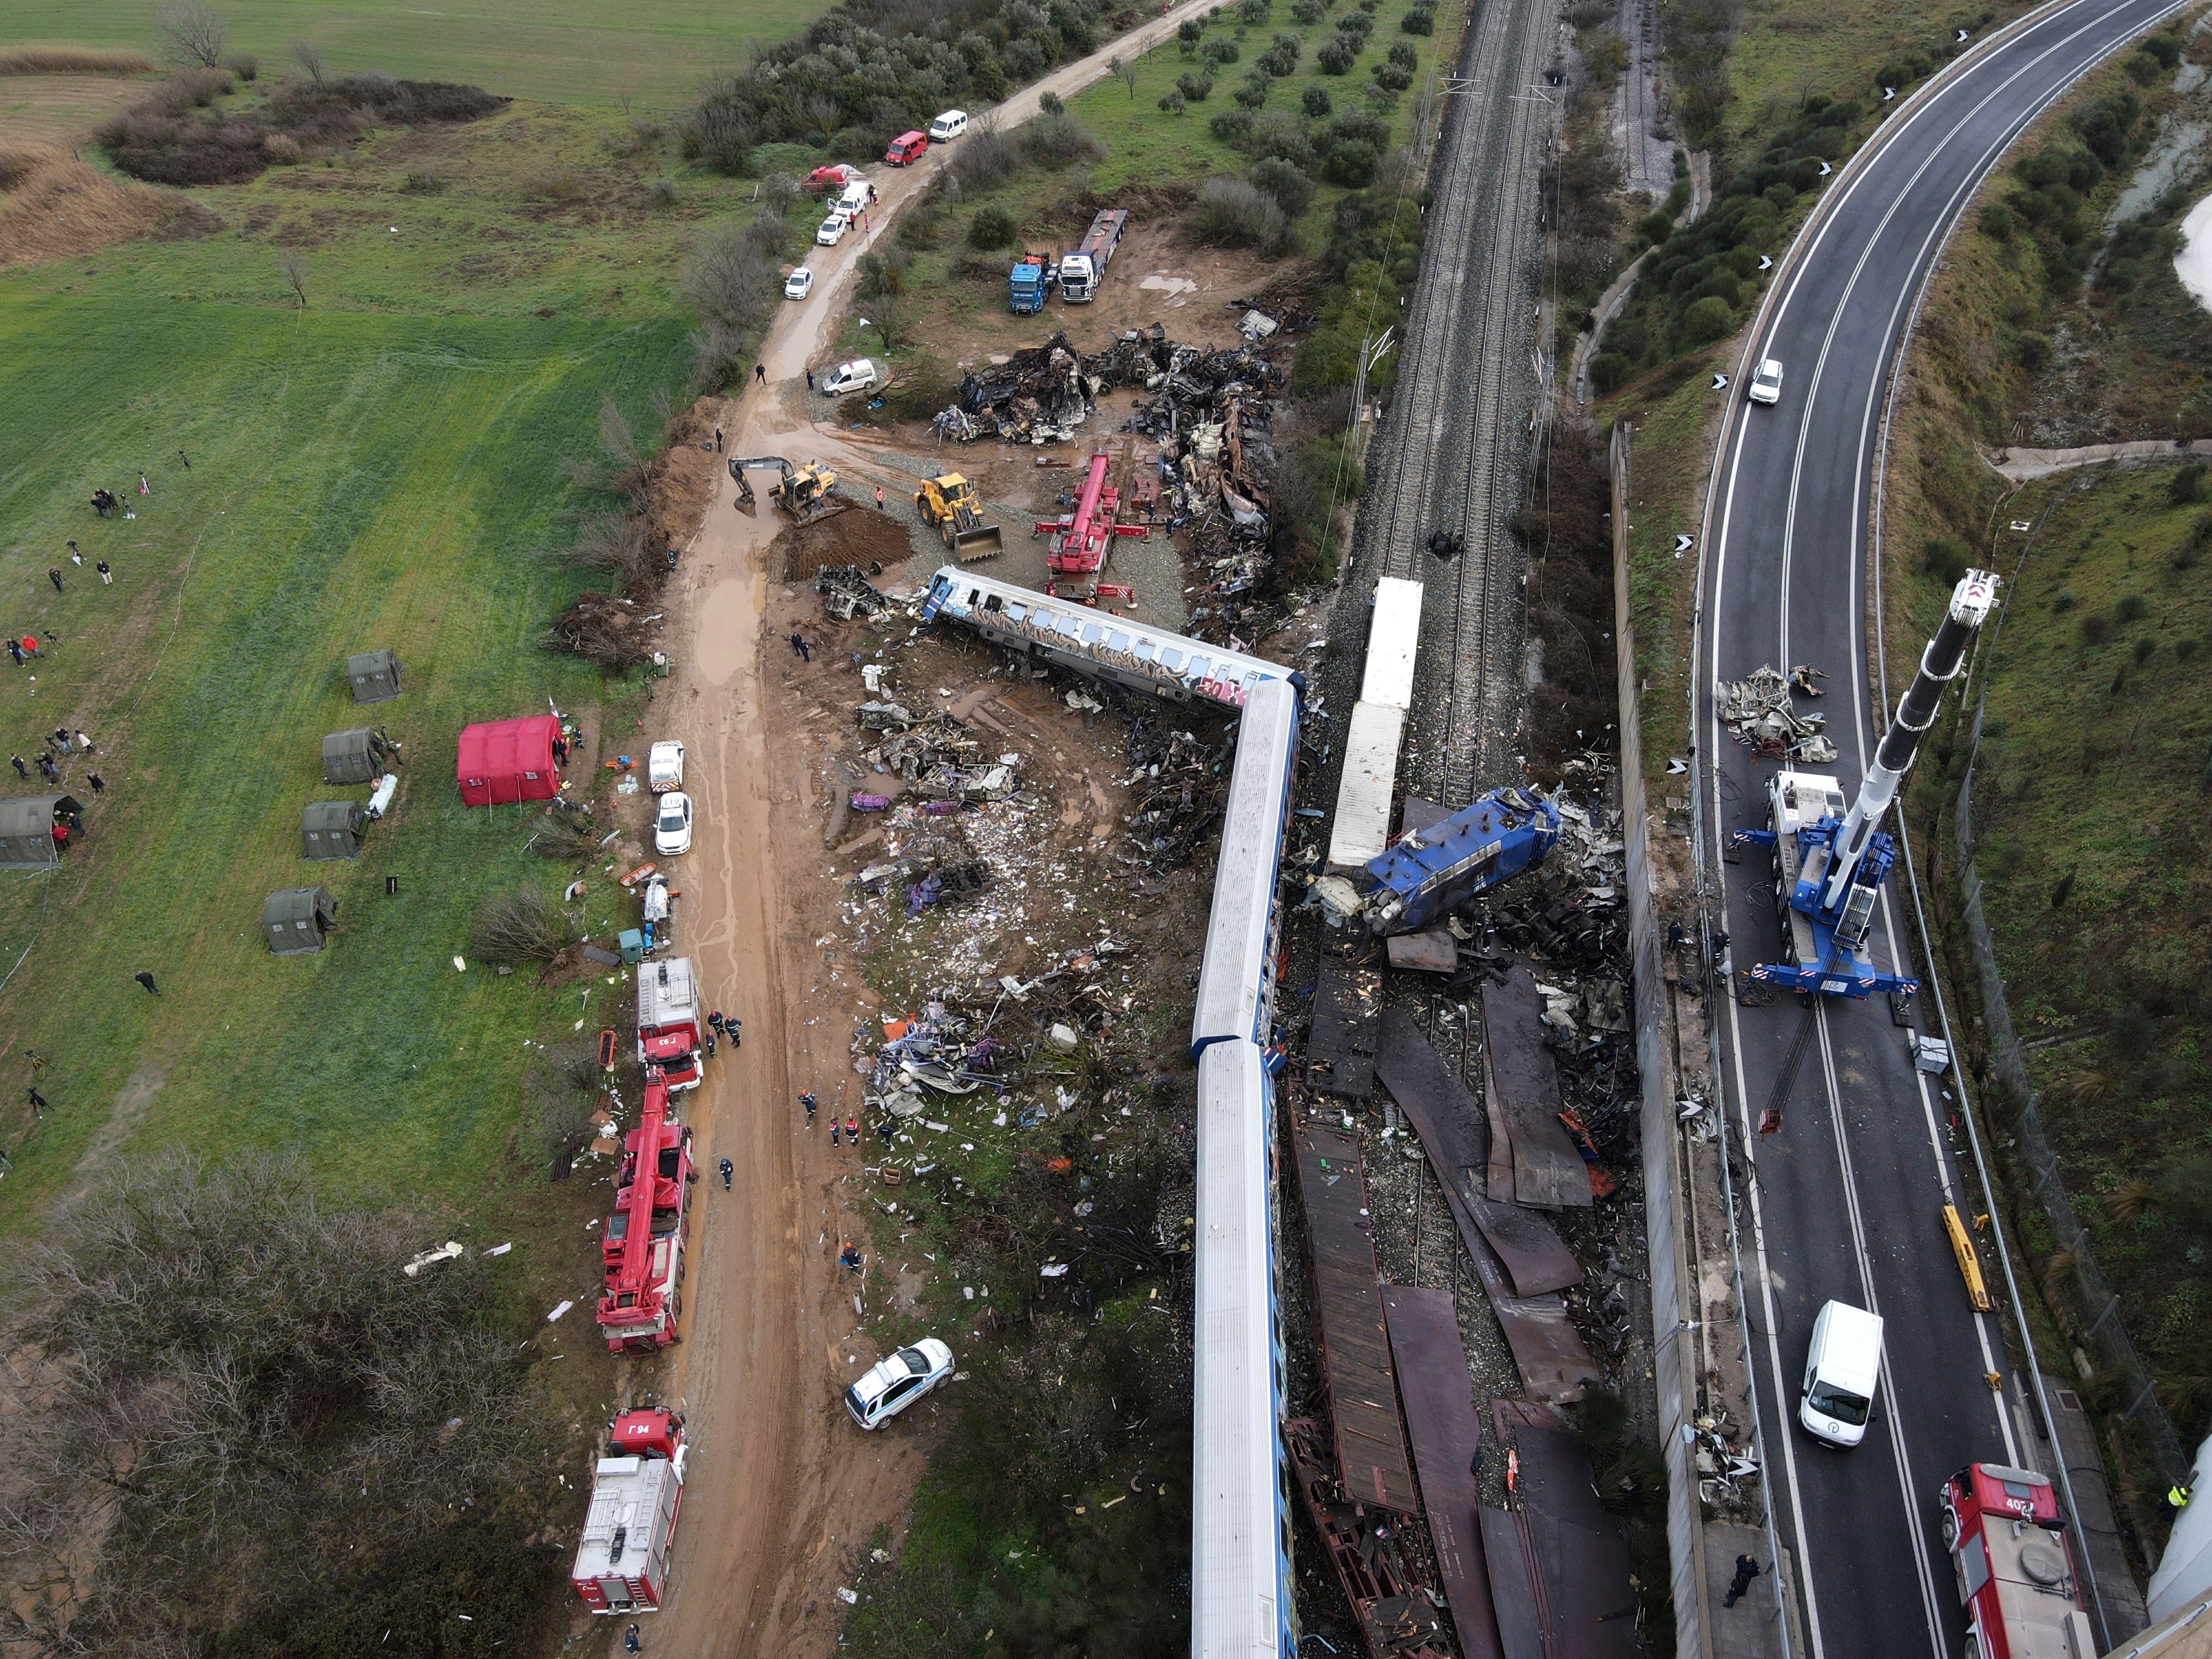 The wreckage of the trains lie on the rail lines in Greece